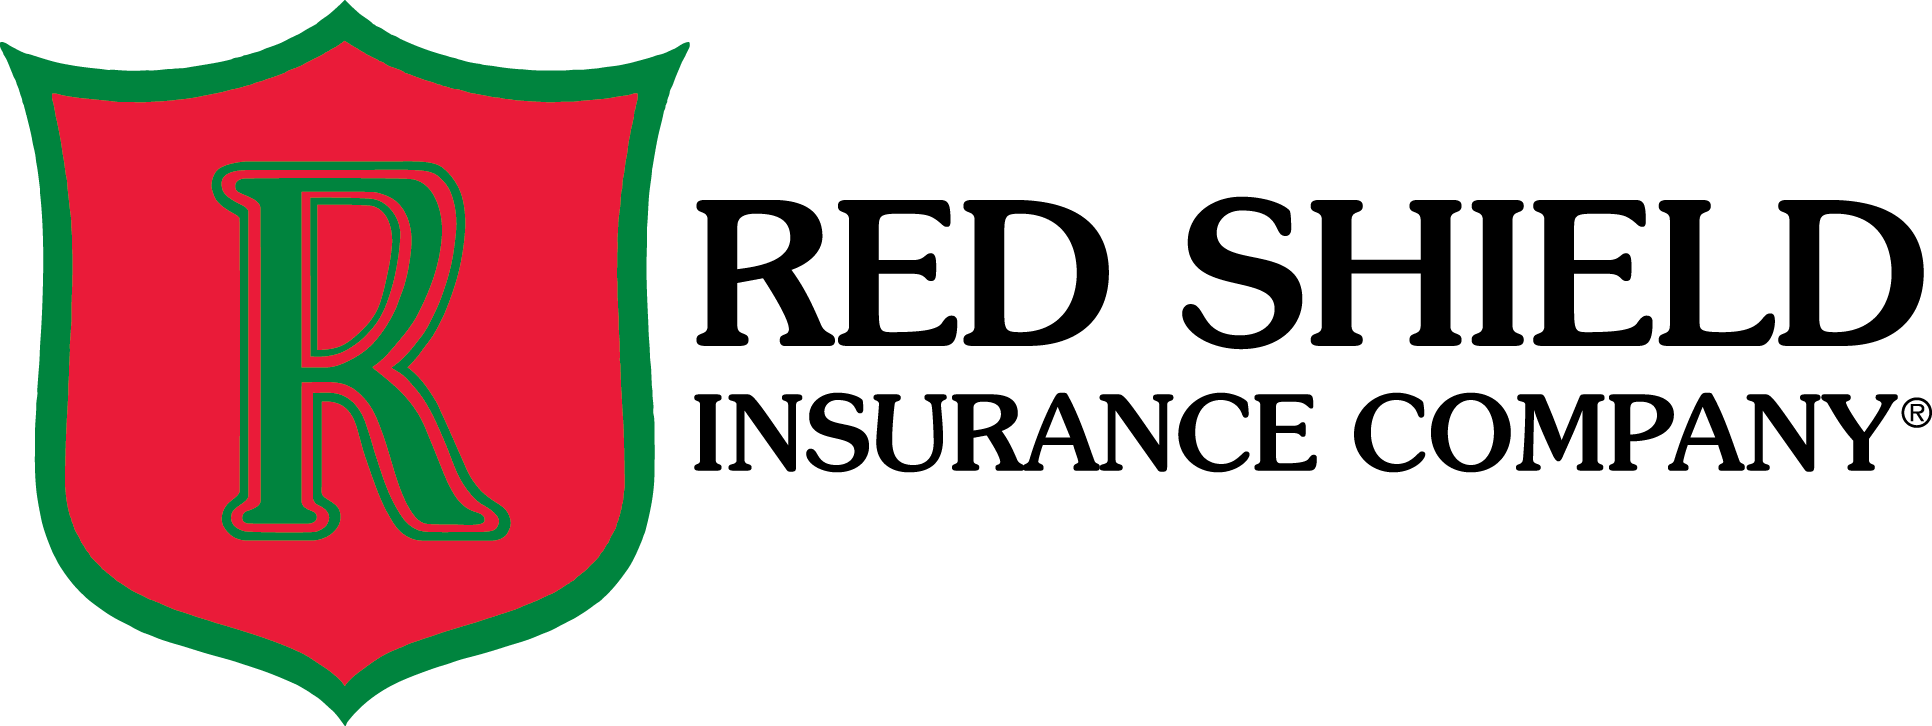 Green and Red Shield Logo - KKlub Members Insurance Agents Western Alliance